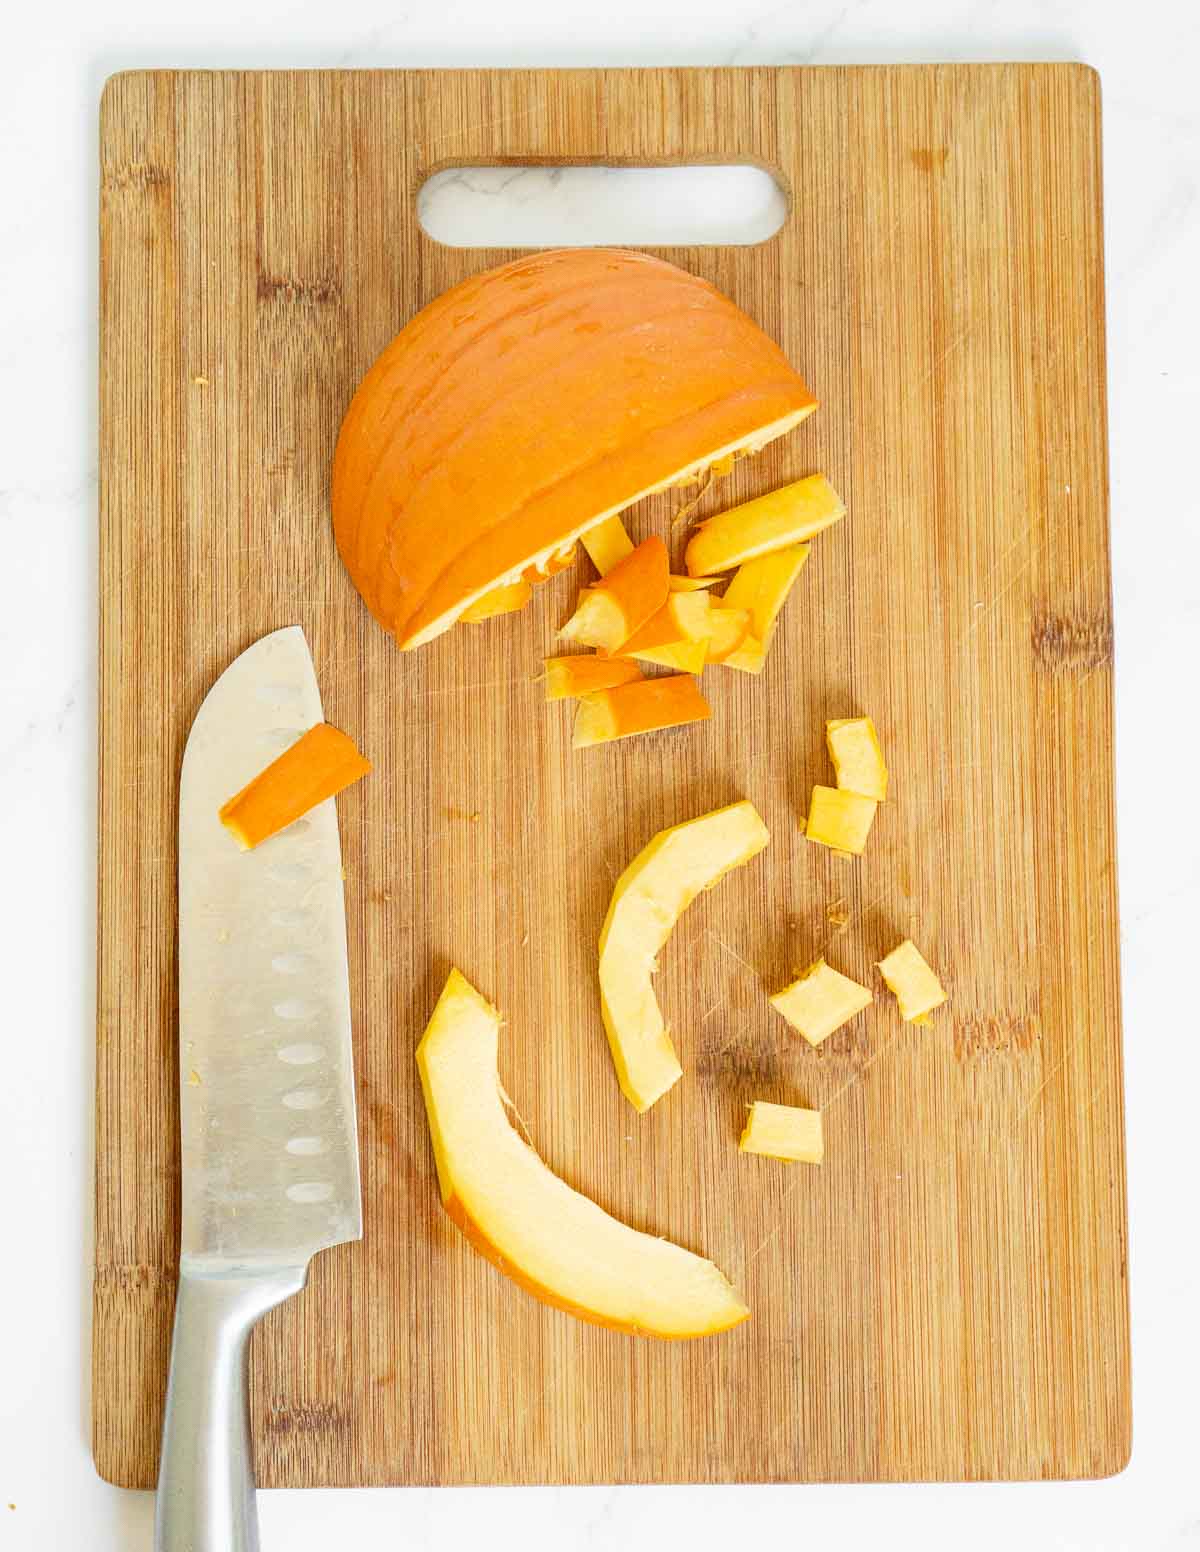 How to dice pumpkin for a frittata